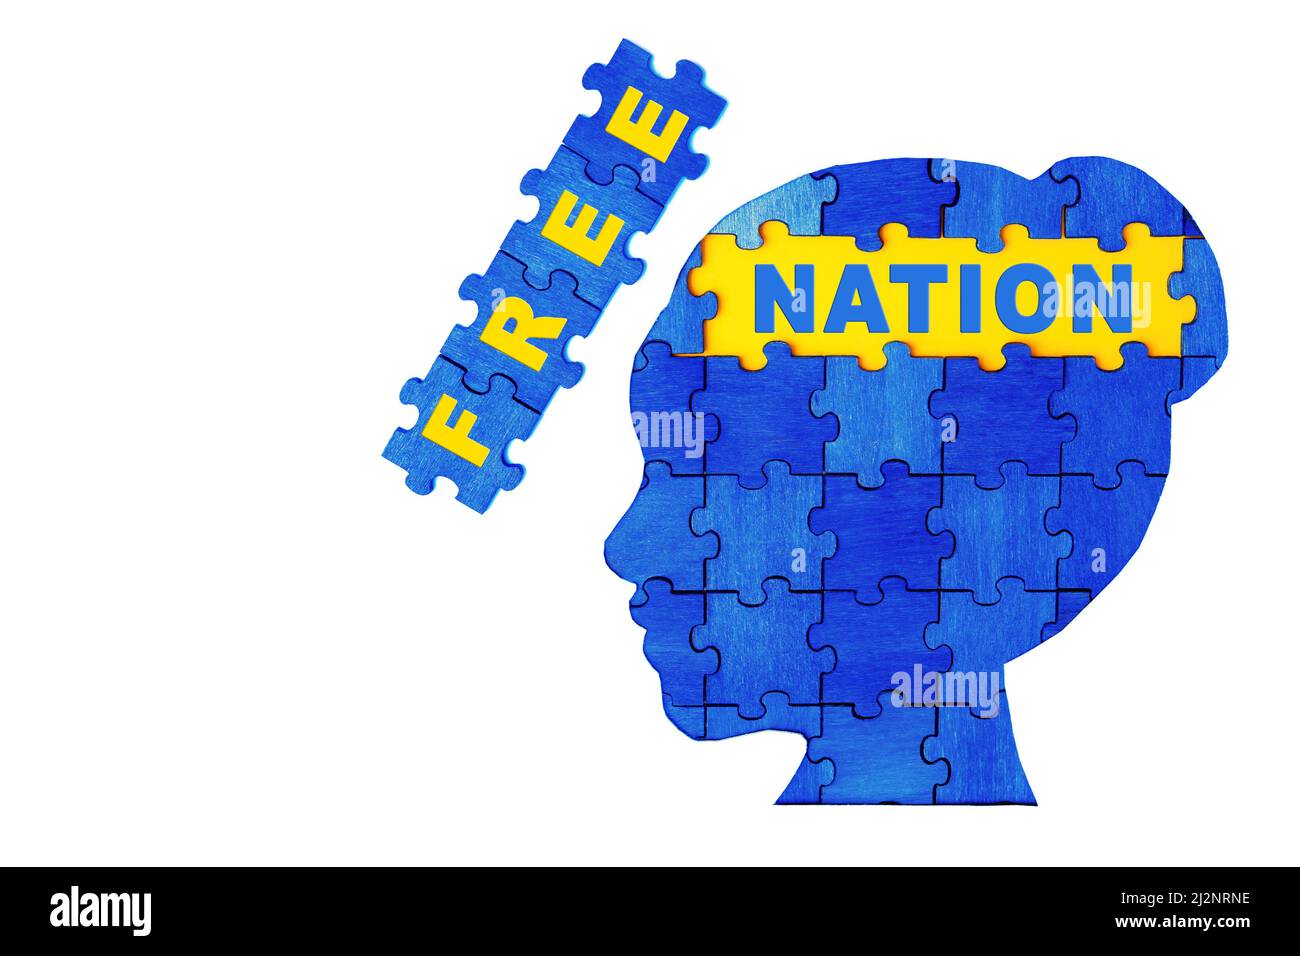 Text FREE NATION inside a female's head profile made of wooden jigsaw puzzle pieces painted blue and yellow. Patriotic concept. Stock Photo